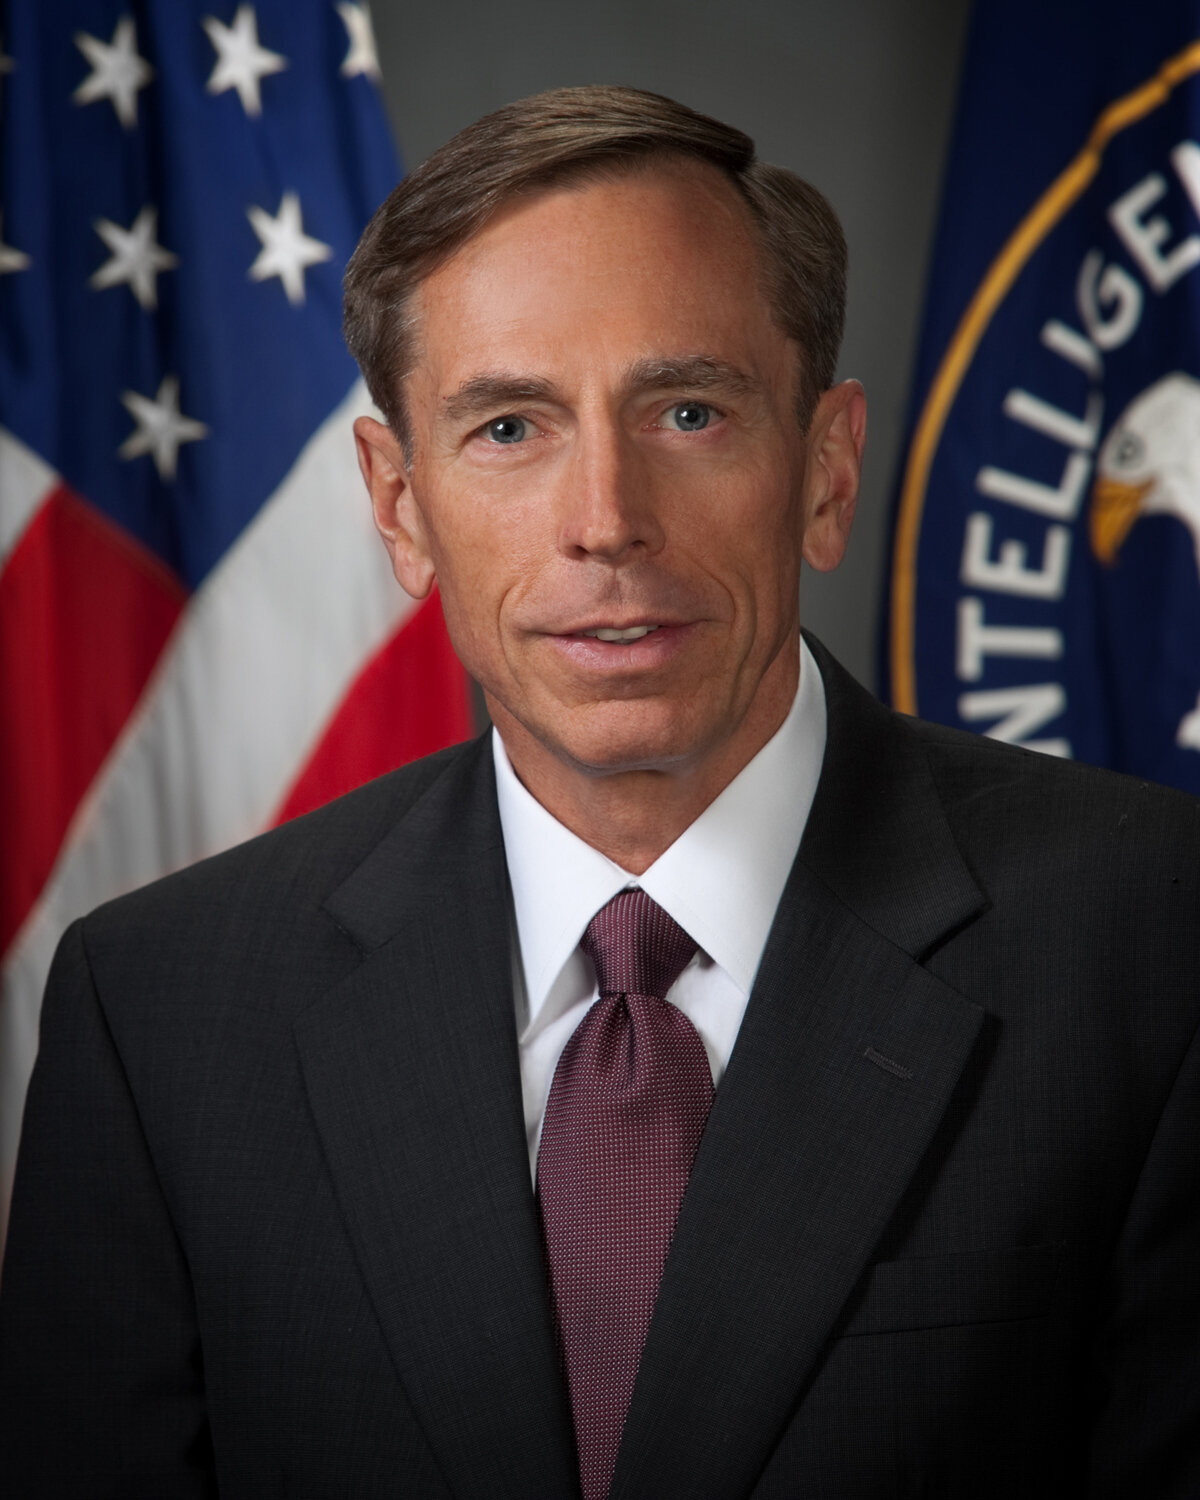 David PetraeusBy Darren Livingston - Central Intelligence Agency, Public Domain, https://commons.wikimedia.org/w/index.php?curid=16448739